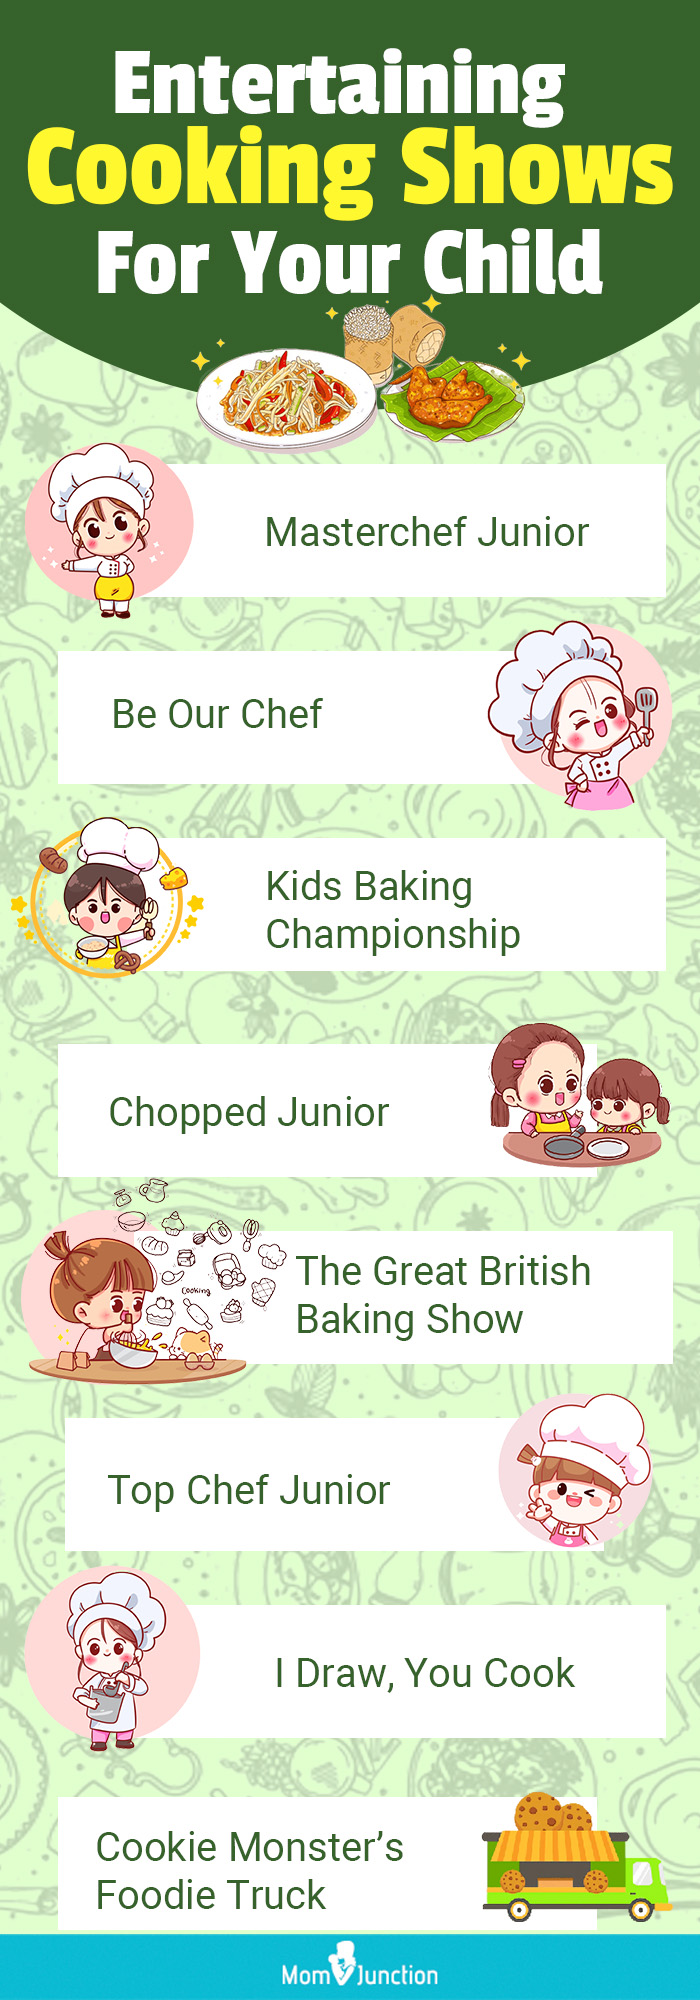 entertaining cooking shows for your child (infographic)